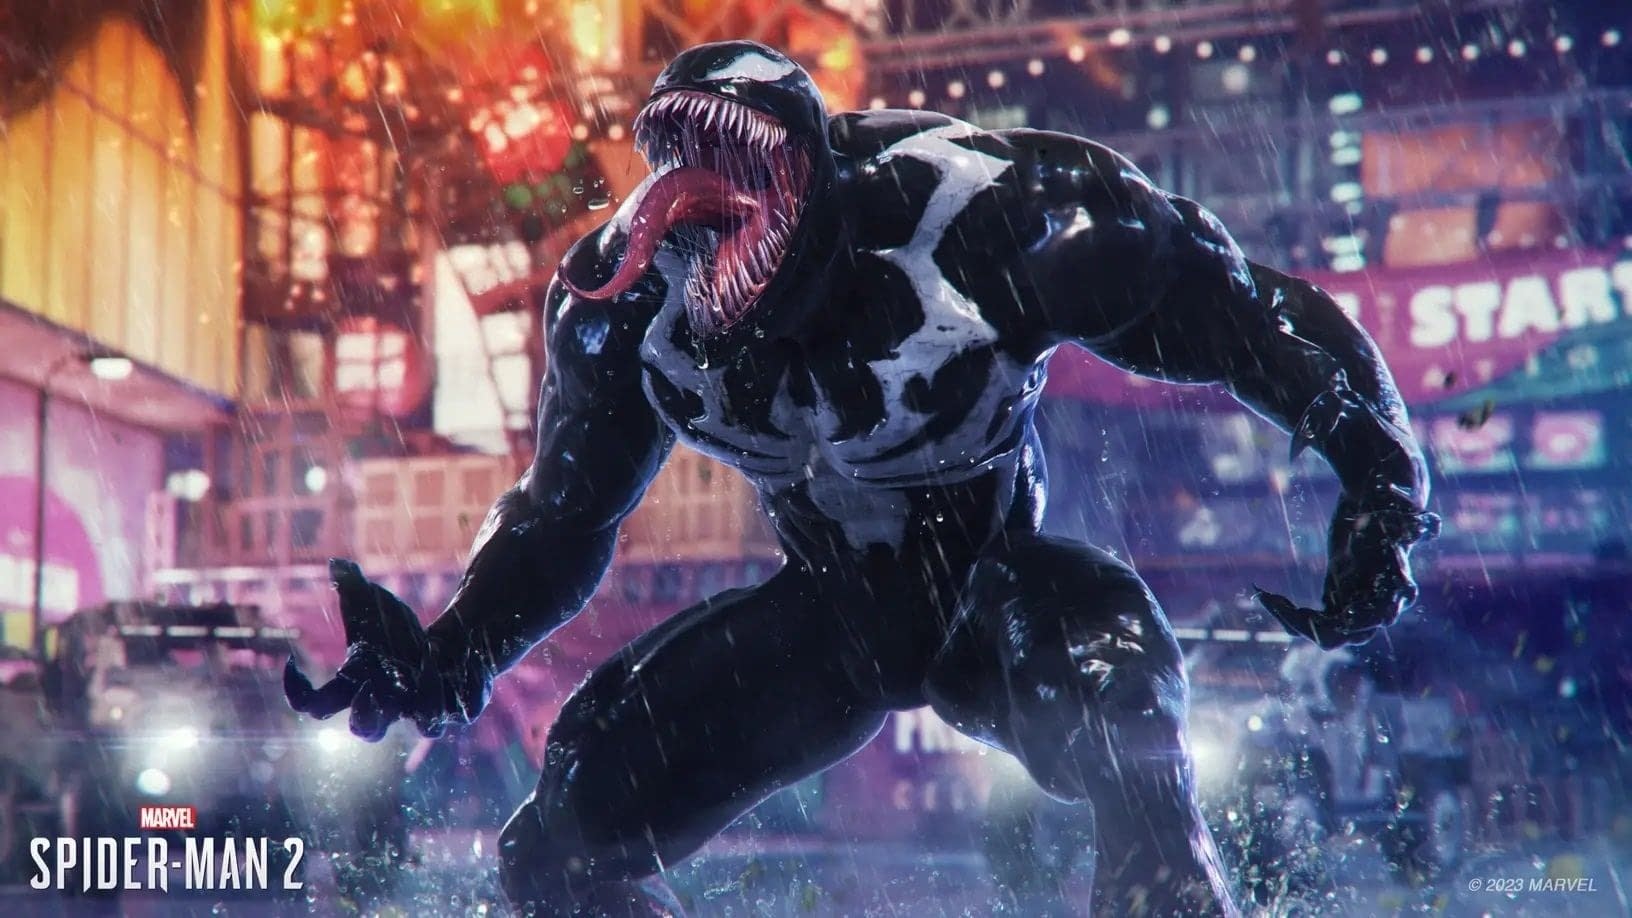 In Spider-Man 2, Venom Talks In The Face Not Included In The Game!